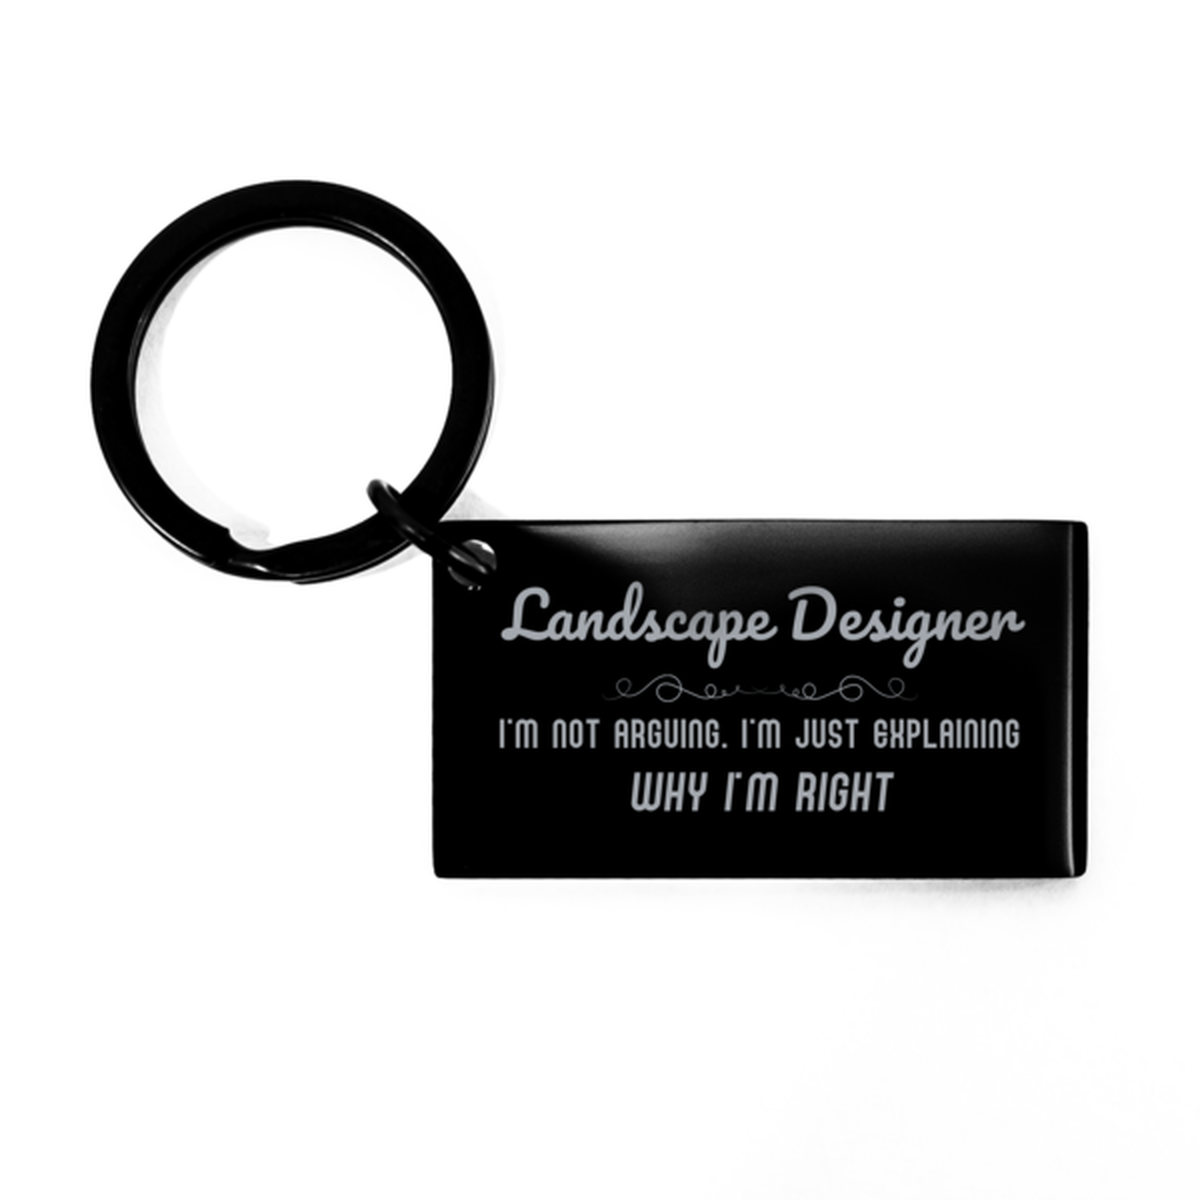 Landscape Designer I'm not Arguing. I'm Just Explaining Why I'm RIGHT Keychain, Funny Saying Quote Landscape Designer Gifts For Landscape Designer Graduation Birthday Christmas Gifts for Men Women Coworker